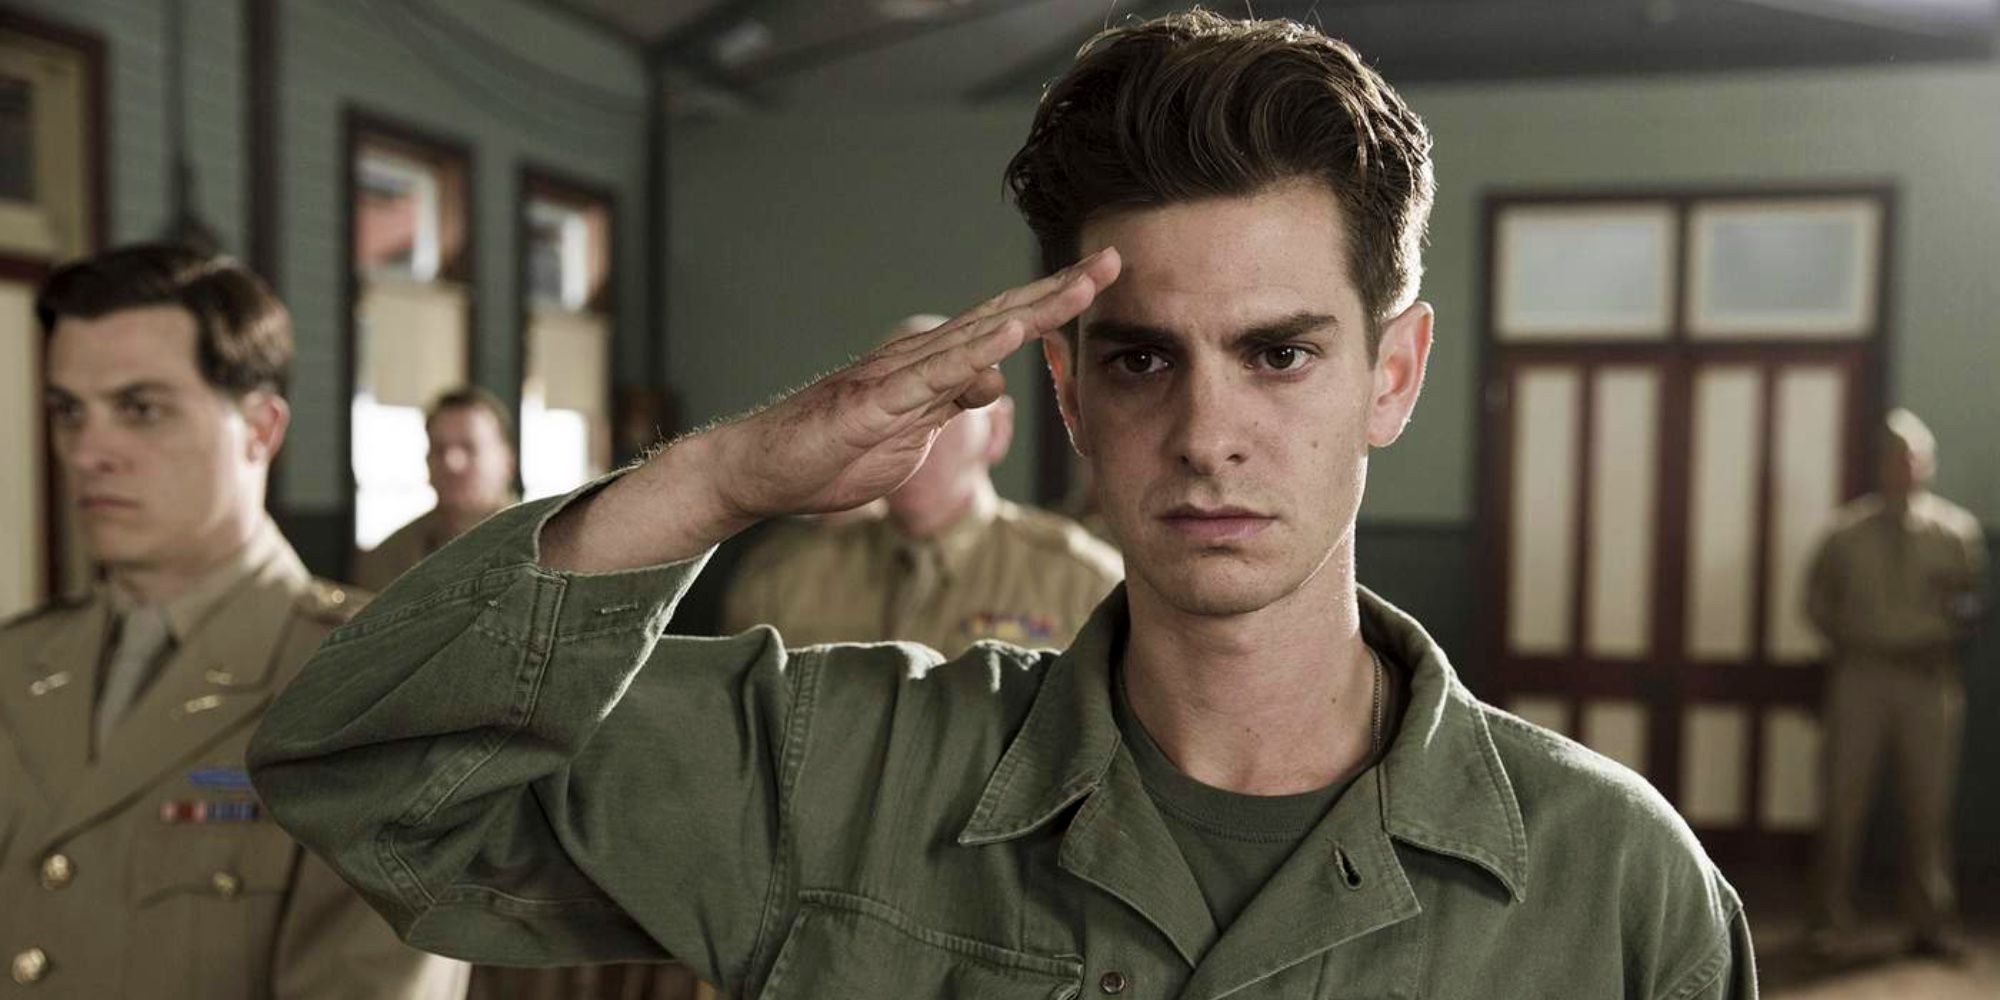 Private Doss saluting in the movie Hacksaw Ridge.